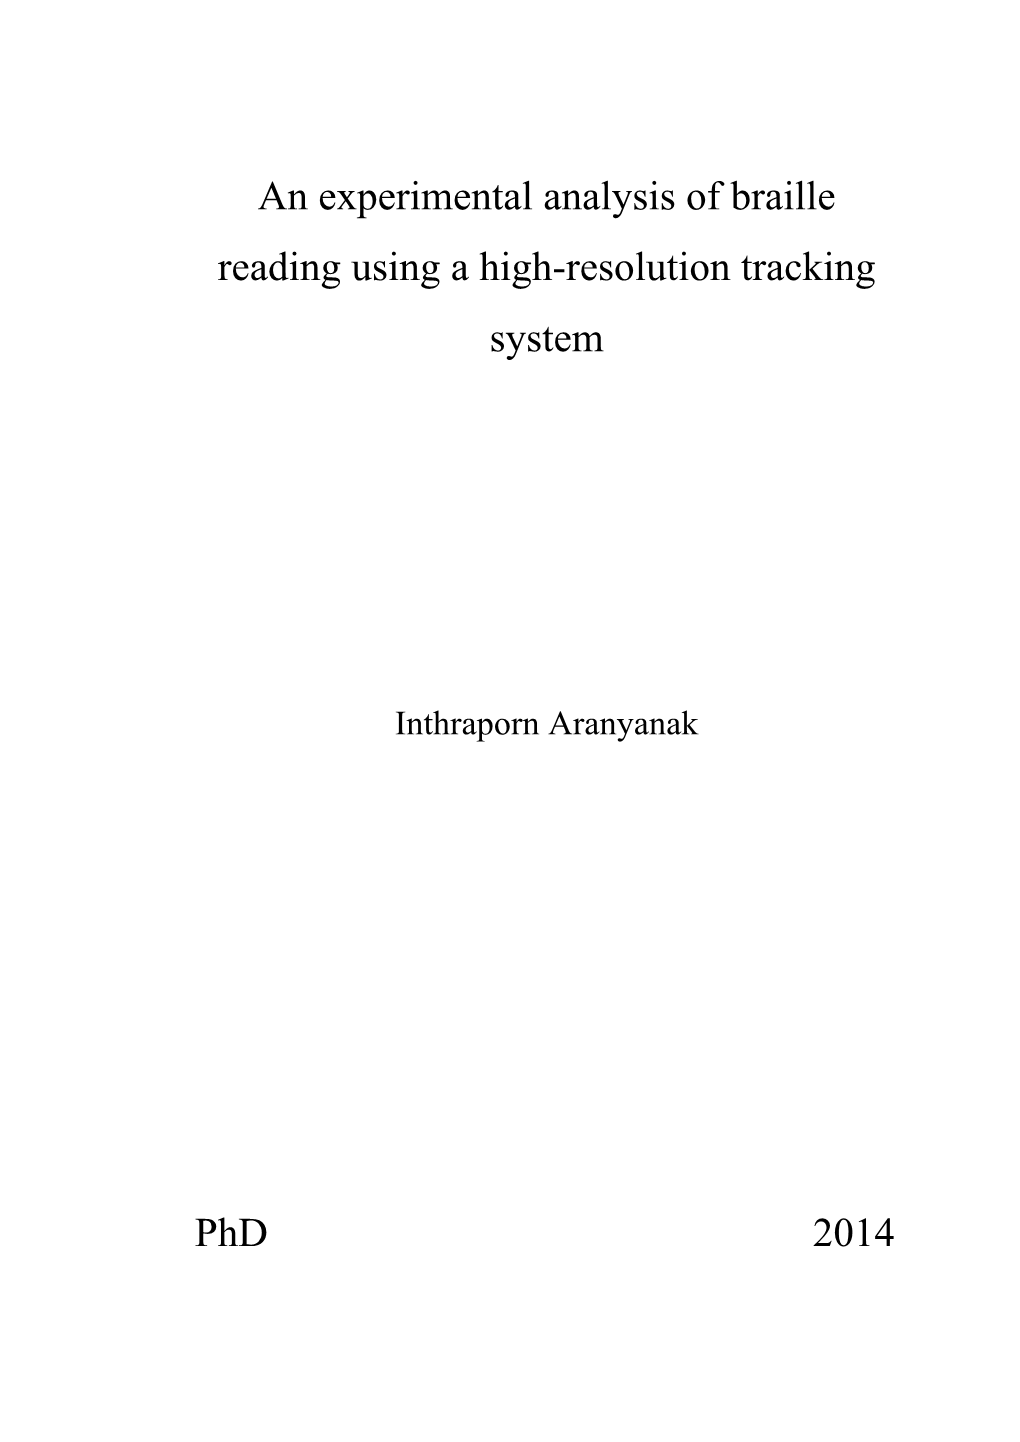 An Experimental Analysis of Braille Reading Using a High-Resolution Tracking System